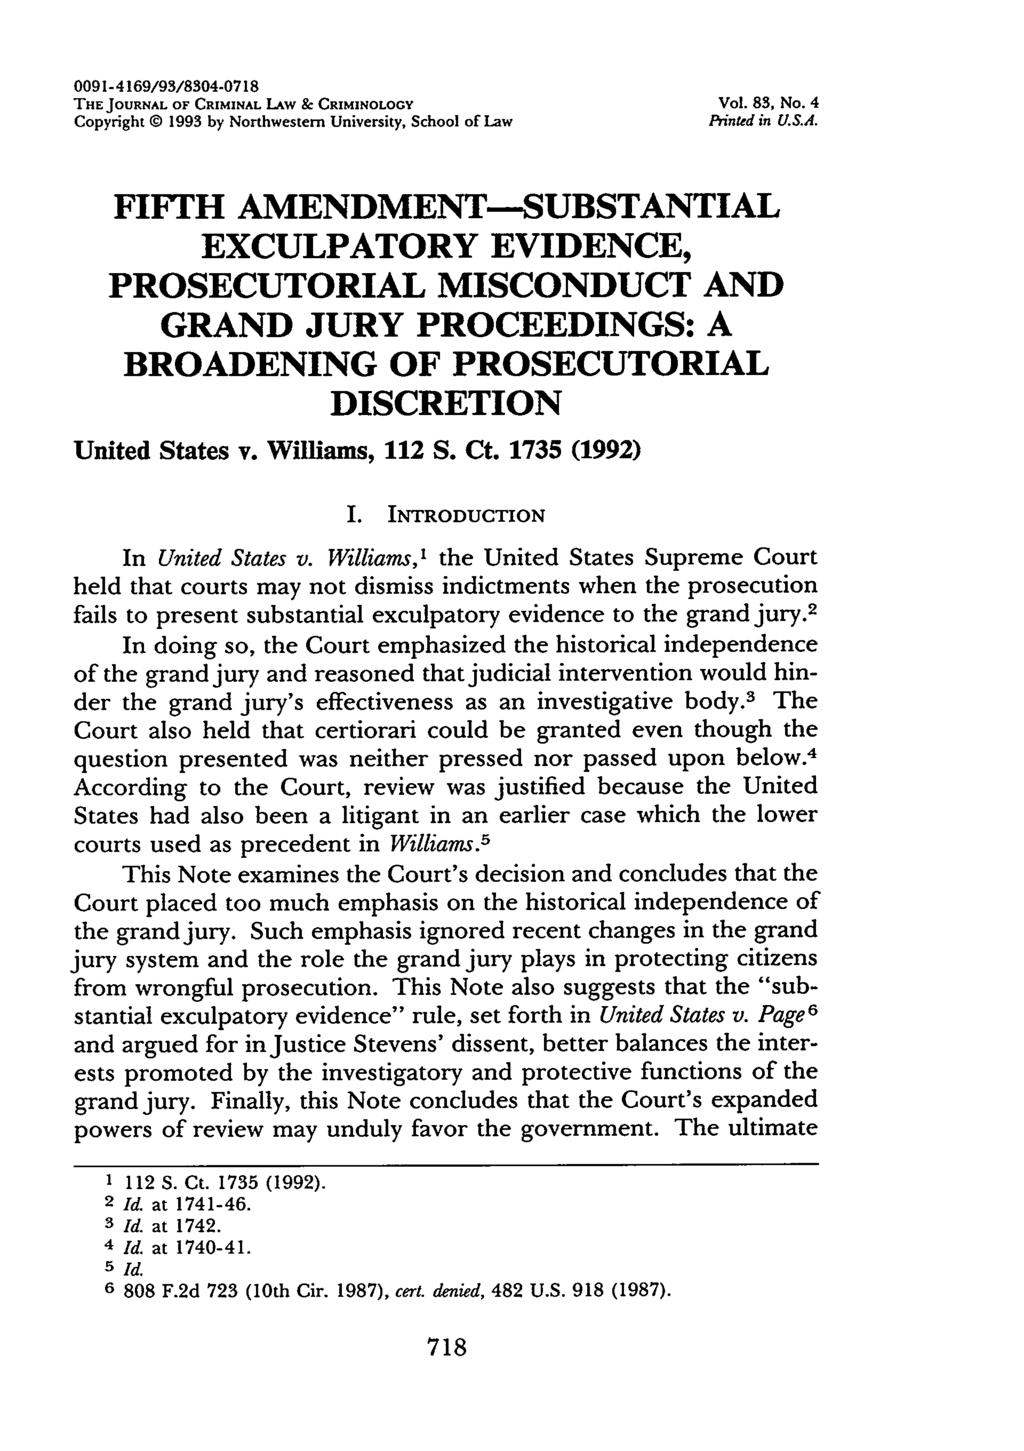 0091-4169/93/8304-0718 THE JOURNAL OF CRIMINAL LAW & CRIMINOLOGY Vol. 83, No. 4 Copyright @ 1993 by Northwestern University, School of Law Printed in U.S.A. FIFTH AMENDMENT-SUBSTANTIAL EXCULPATORY EVIDENCE, PROSECUTORIAL MISCONDUCT AND GRAND JURY PROCEEDINGS: A BROADENING OF PROSECUTORIAL DISCRETION United States v.